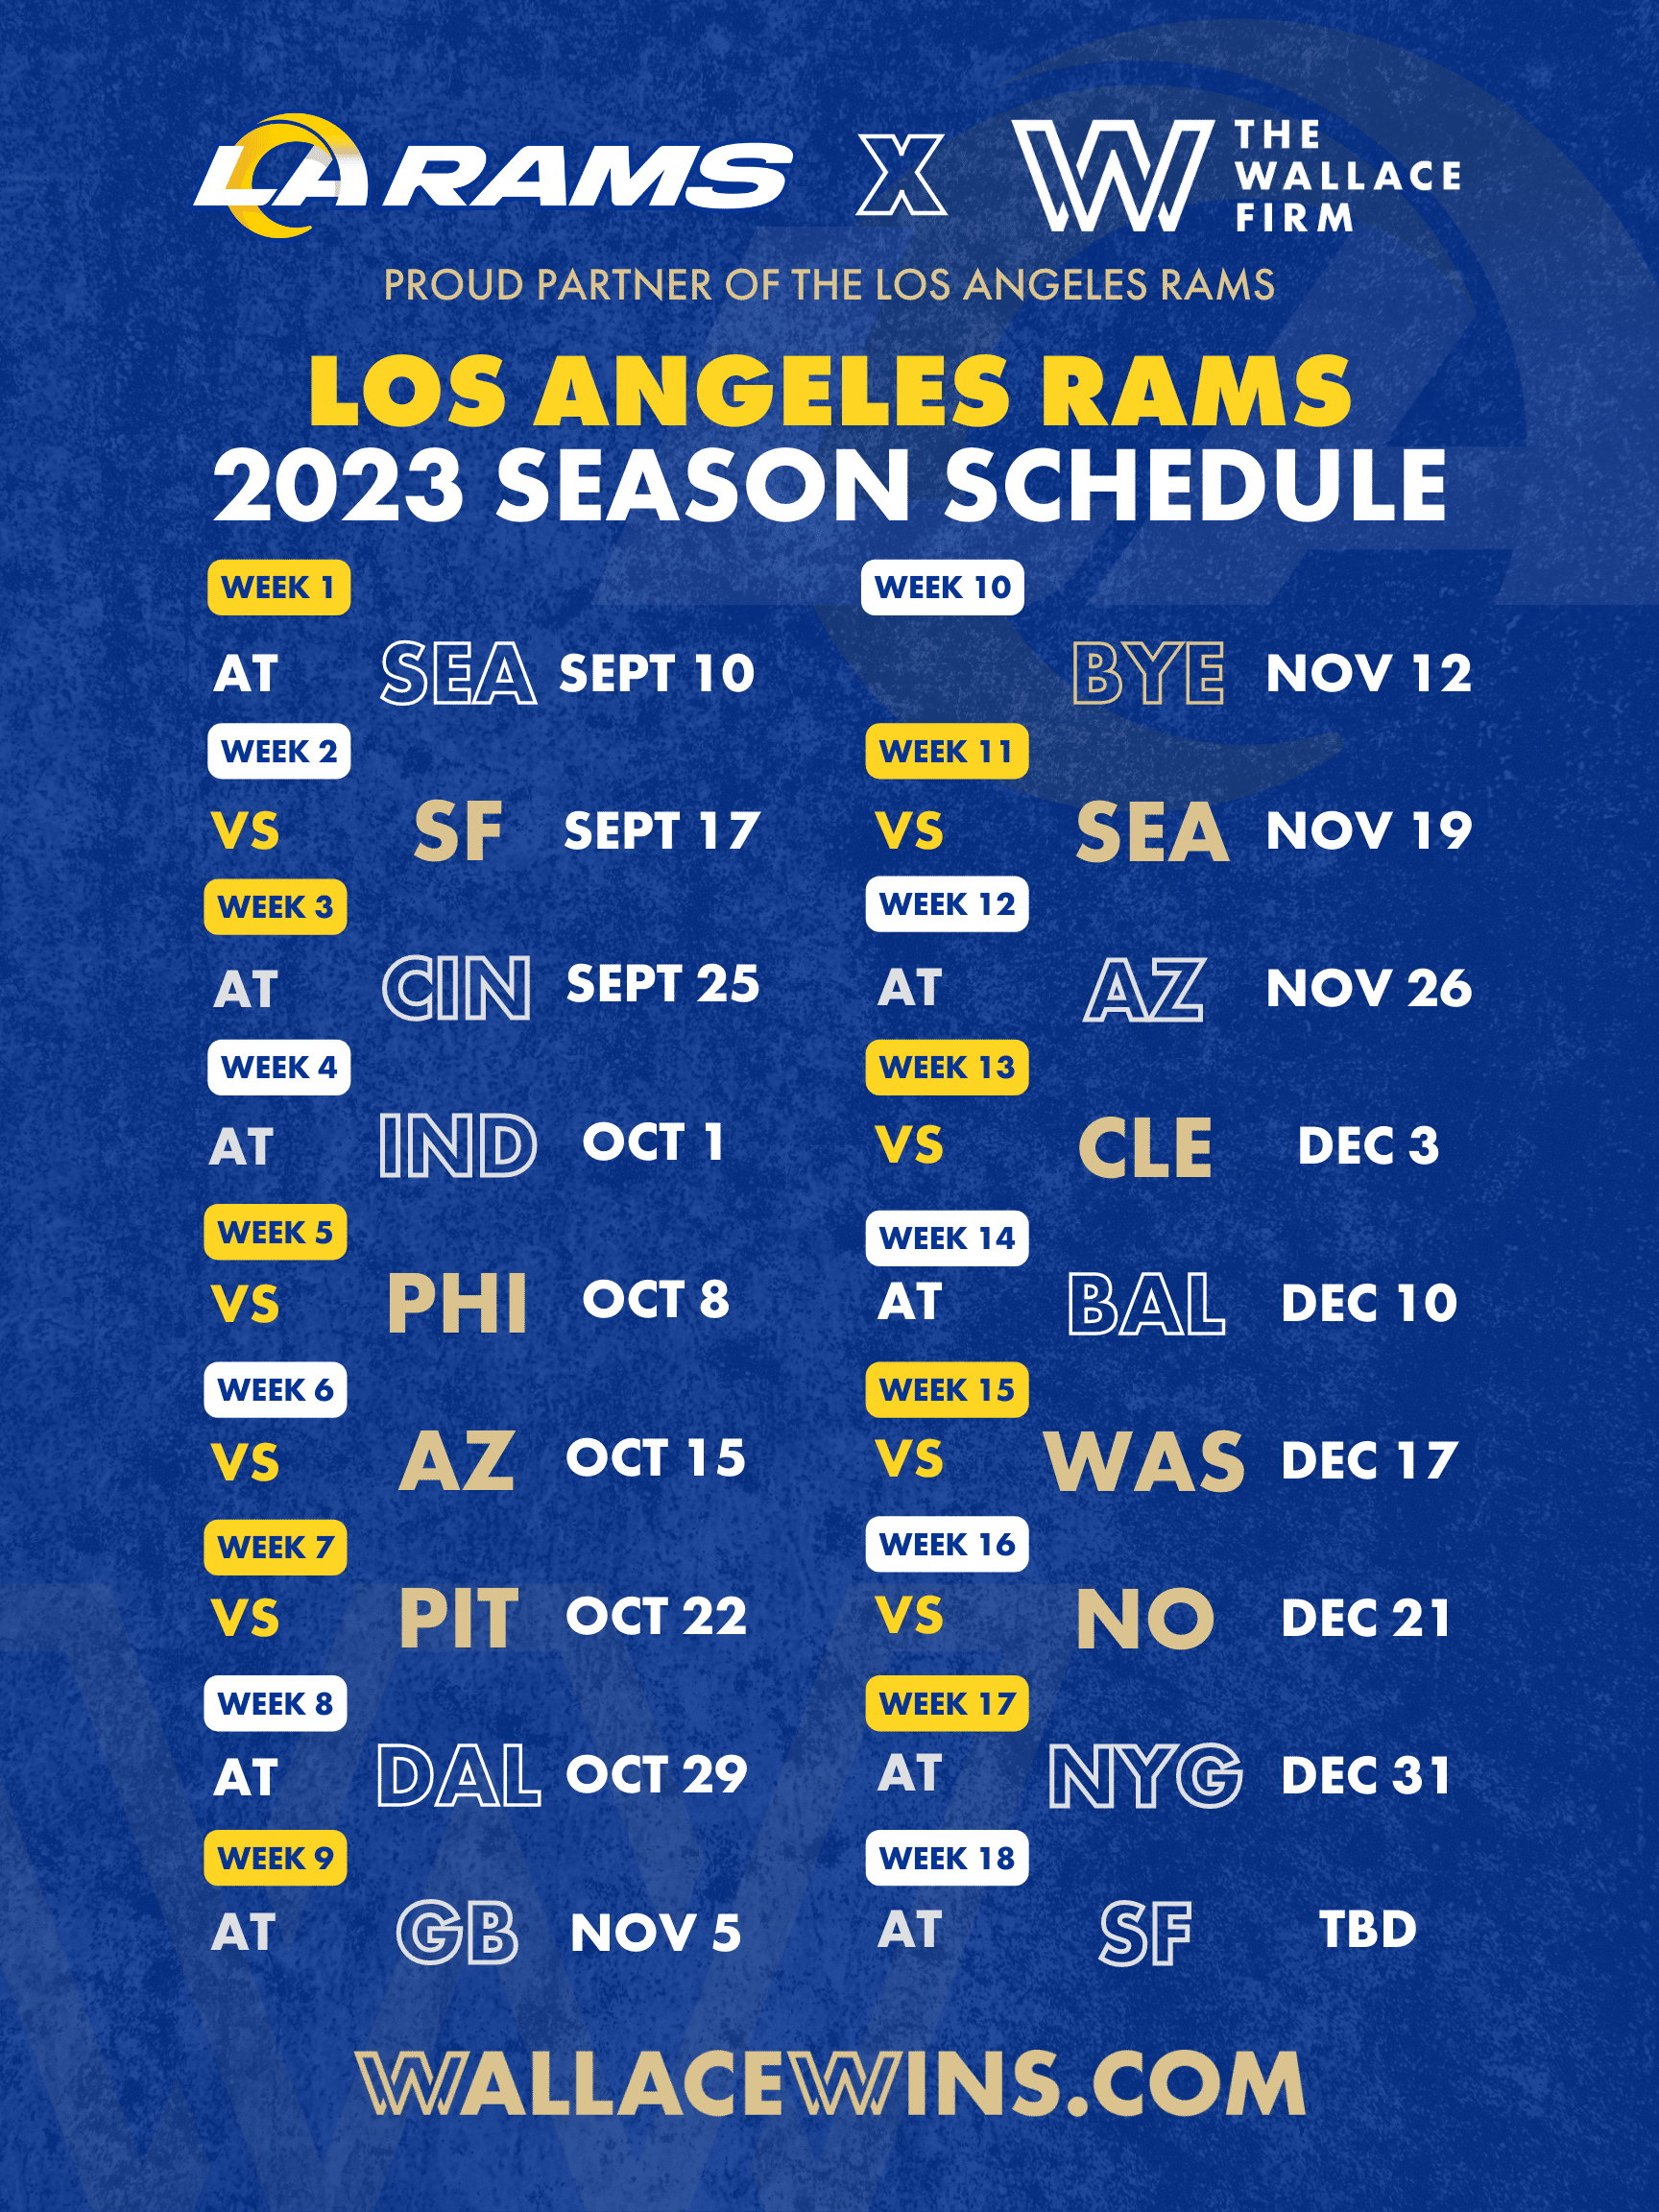 give me the rams schedule